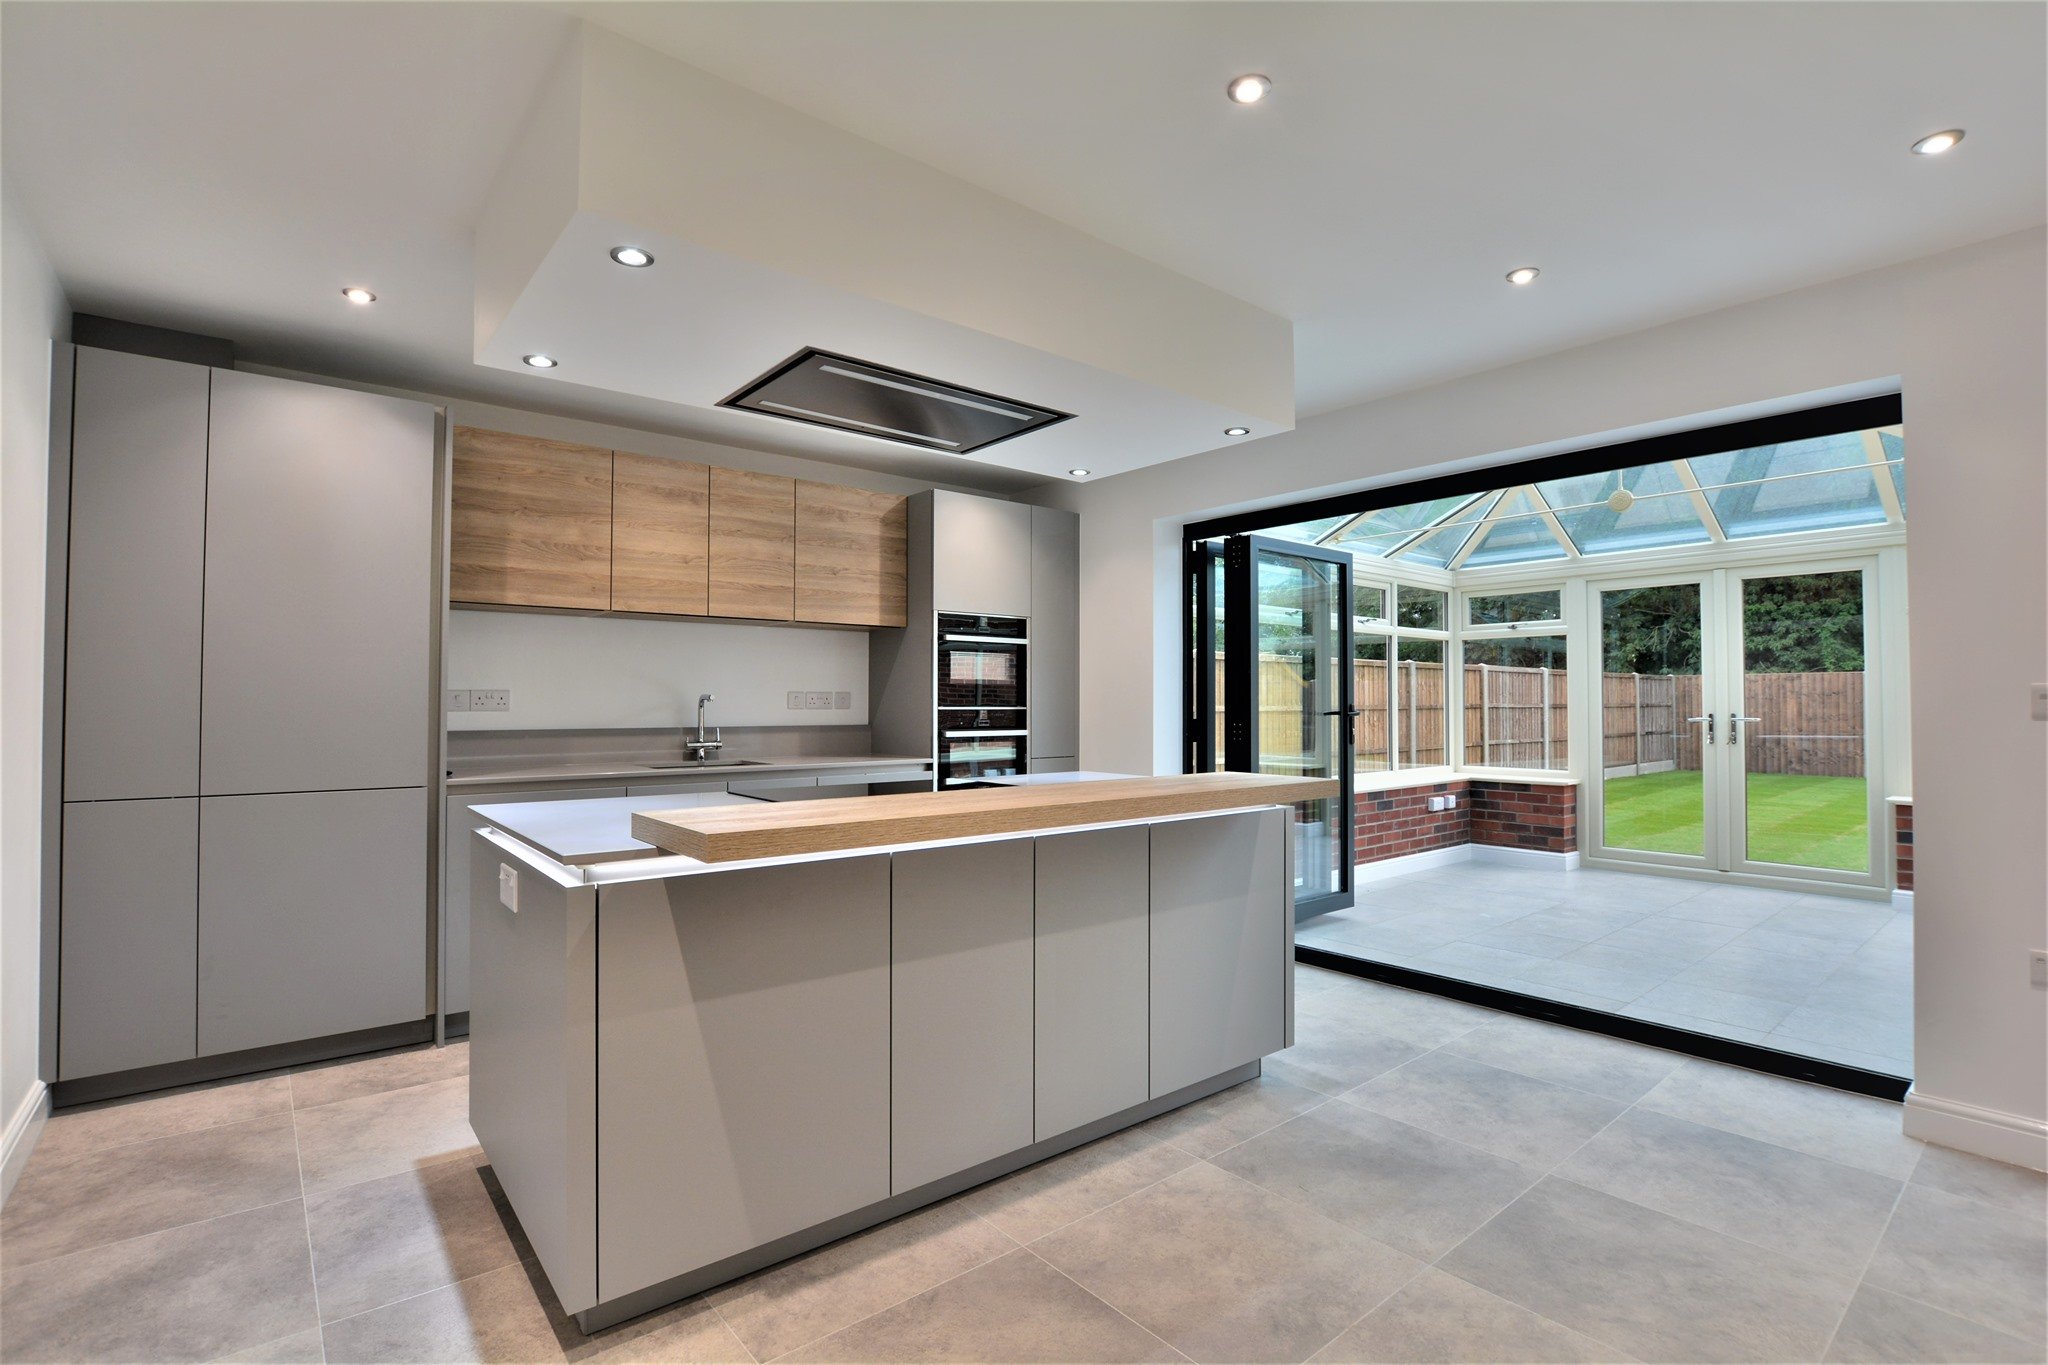 Grey kitchen with cantelevered breakfast bar on the kitchen Island - chanceoptions homes